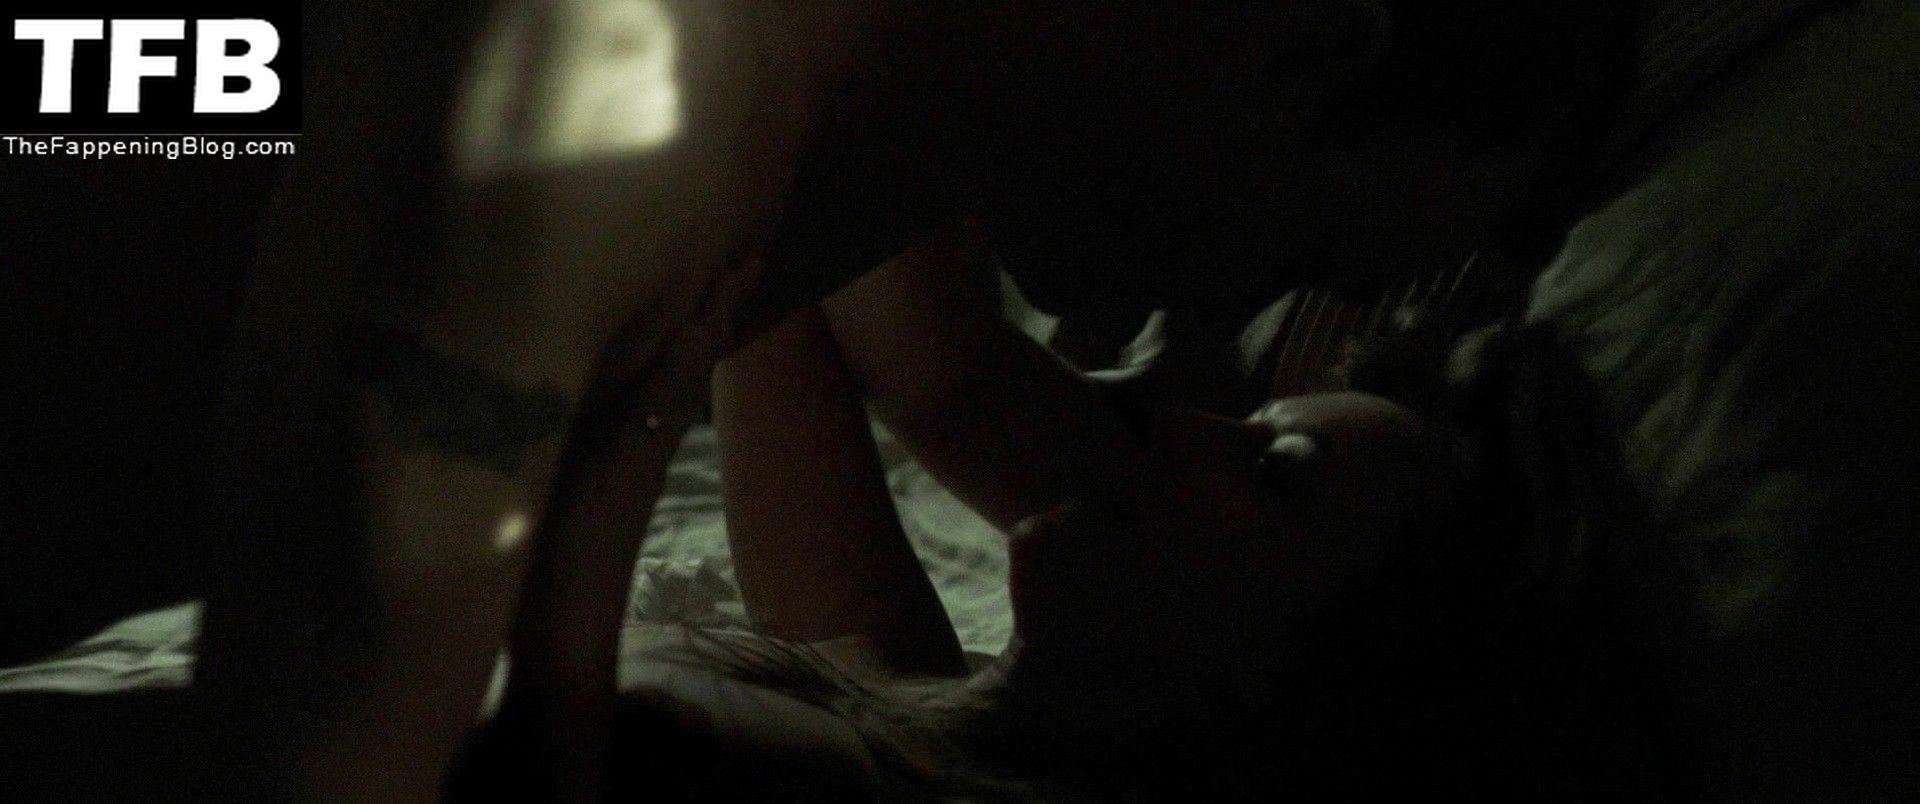 Katharine Isabelle Nude & Sexy Collection (31 Photos)